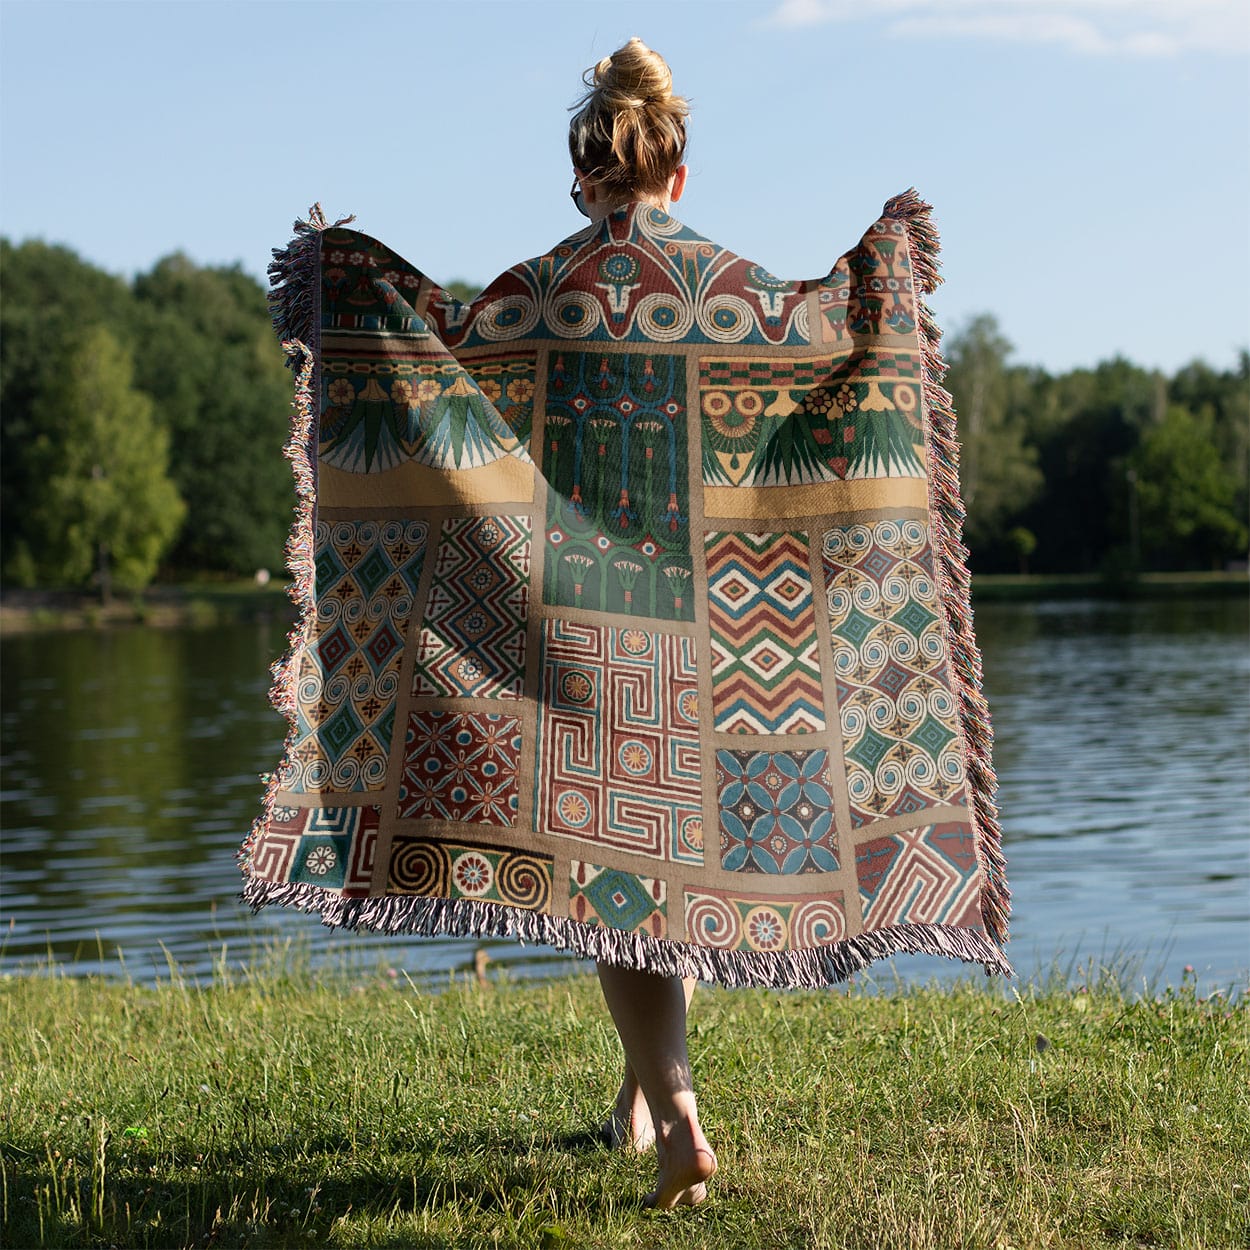 Unique Designs Woven Blanket Held on a Woman's Back Outside